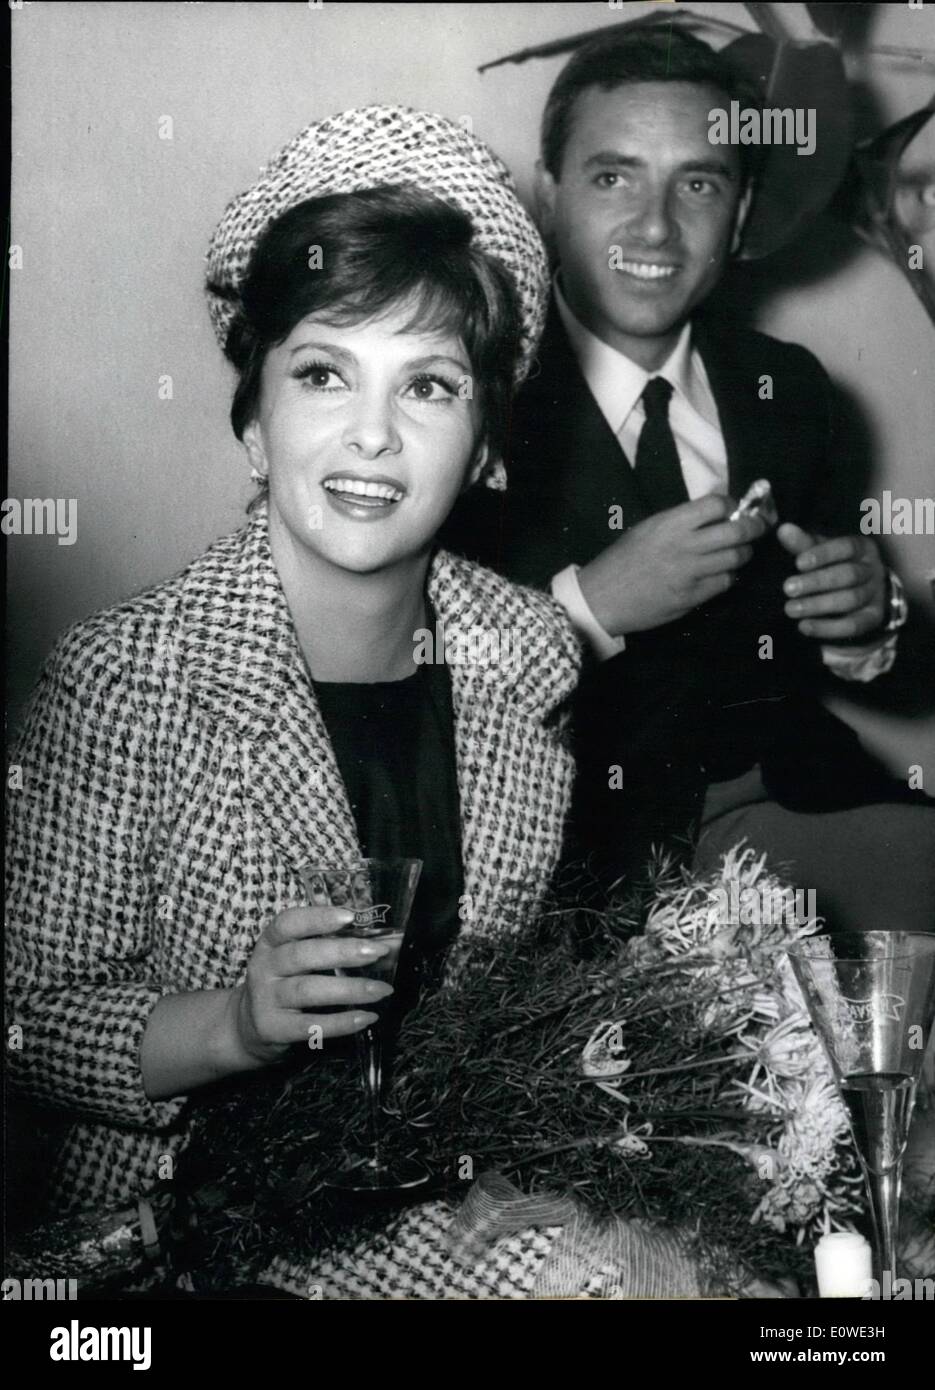 Jul. 07, 1962 - Gina Lollobrigida in Berlin : To the end of the XII. International film festival the charming guest of the festival was arriving today ( 2.7.1962) in Berlin. Gina Lollobrigida. she will stay here for two days and see the premiers of her film ''The beautiful ippolita''. photo shows Gina Lollobrigida on the tempelhofer airpalce. Stock Photo